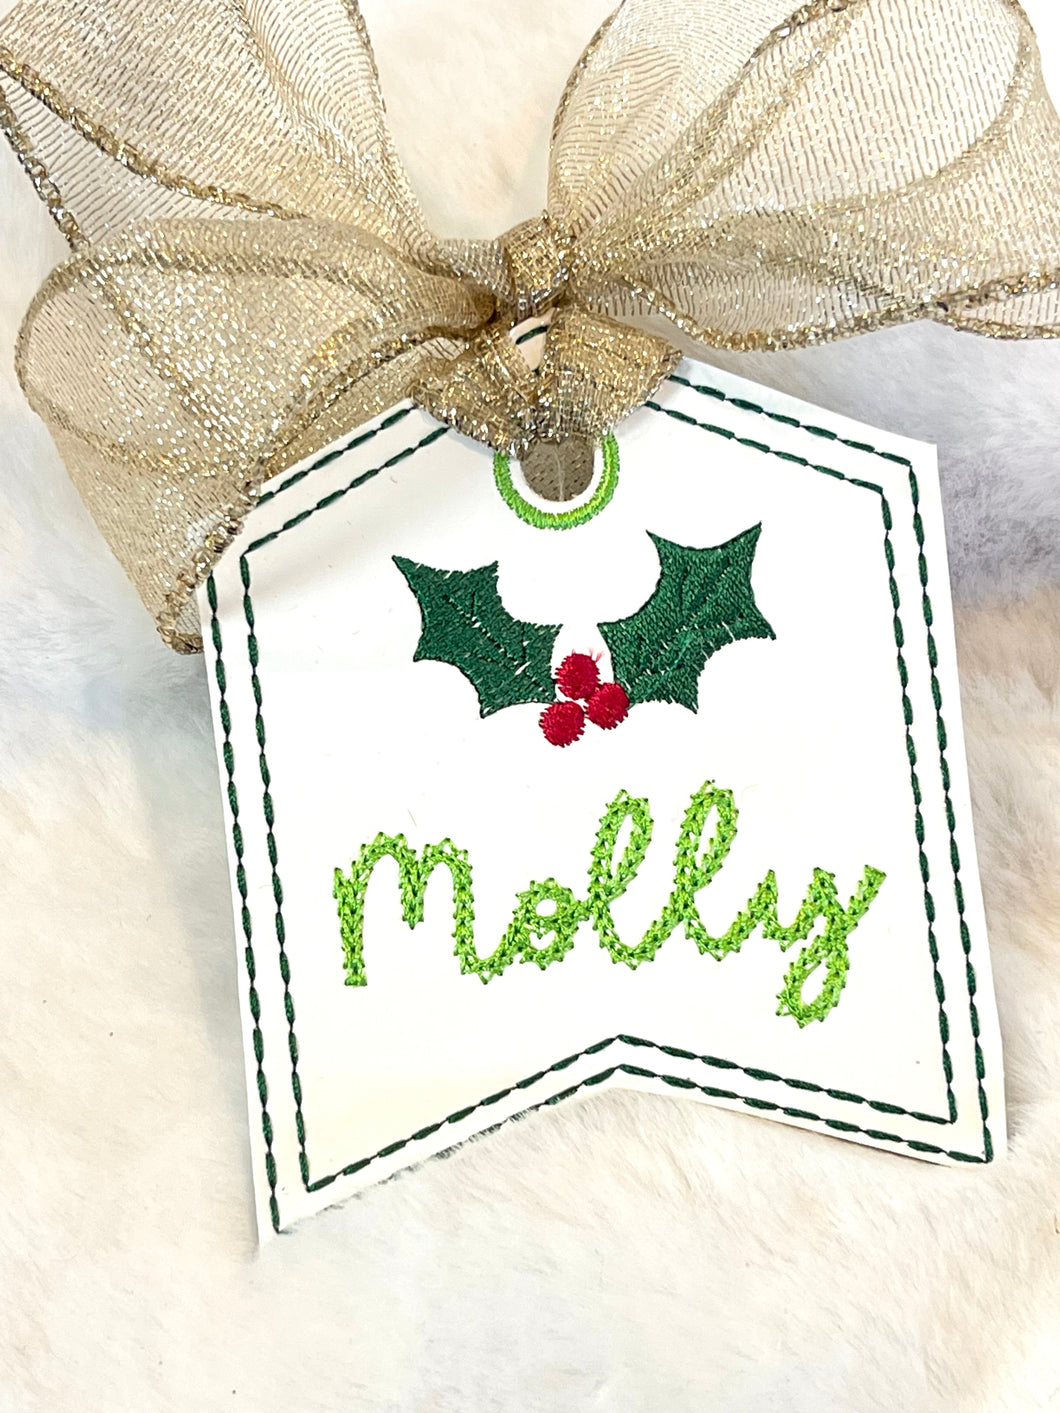 Holly Flag Tag - Personalizable Tag